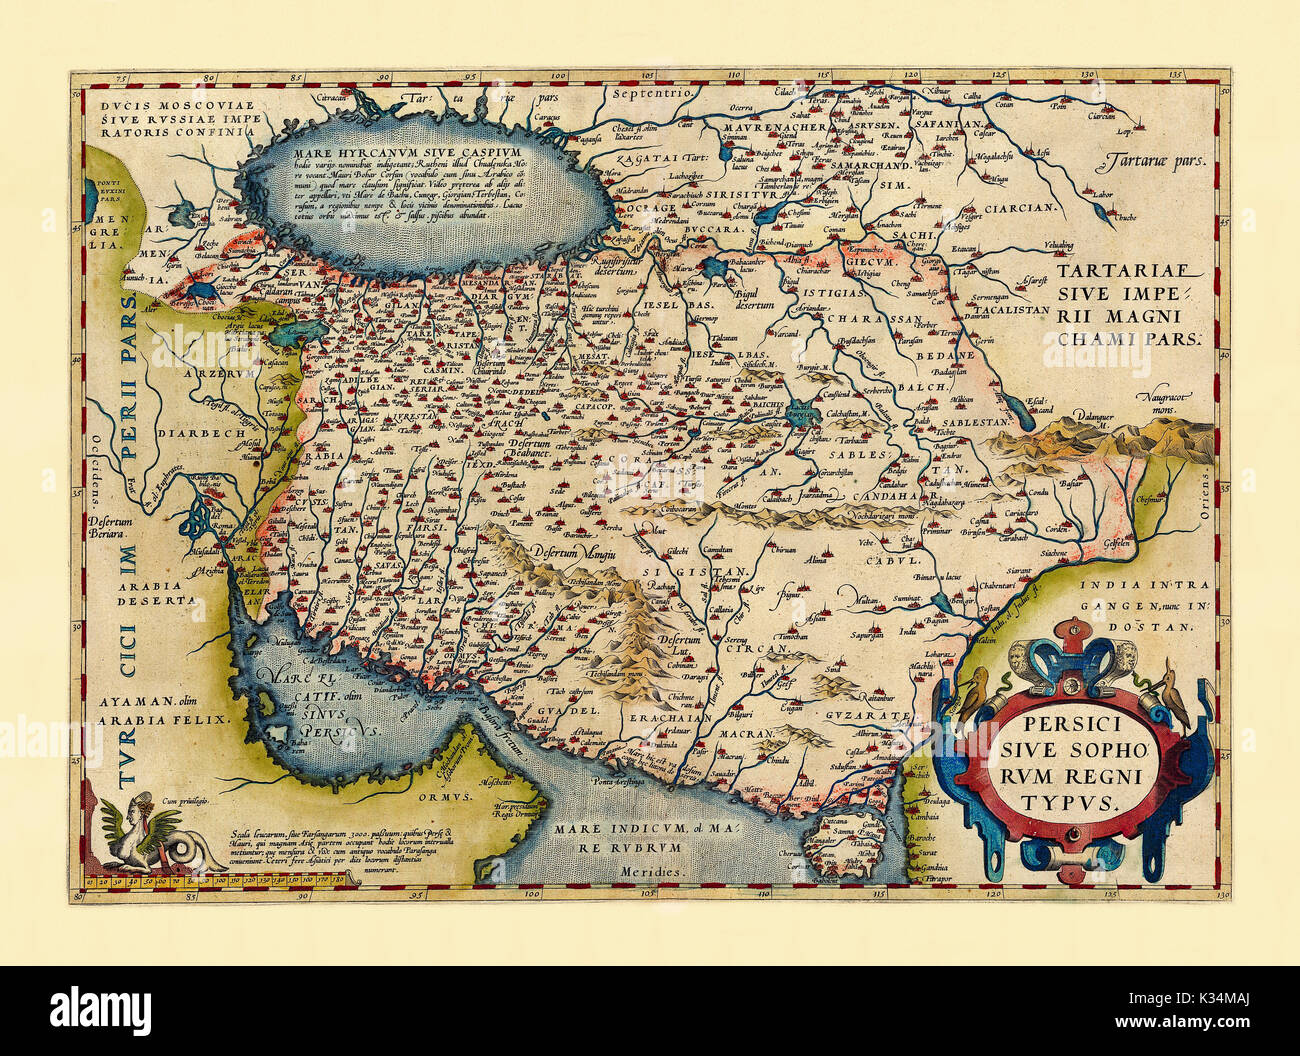 Old map of Persia. Excellent state of preservation realized in ancient style. All the graphic composition is inside a frame. By Ortelius, Theatrum Orbis Terrarum, Antwerp, 1570 Stock Photo